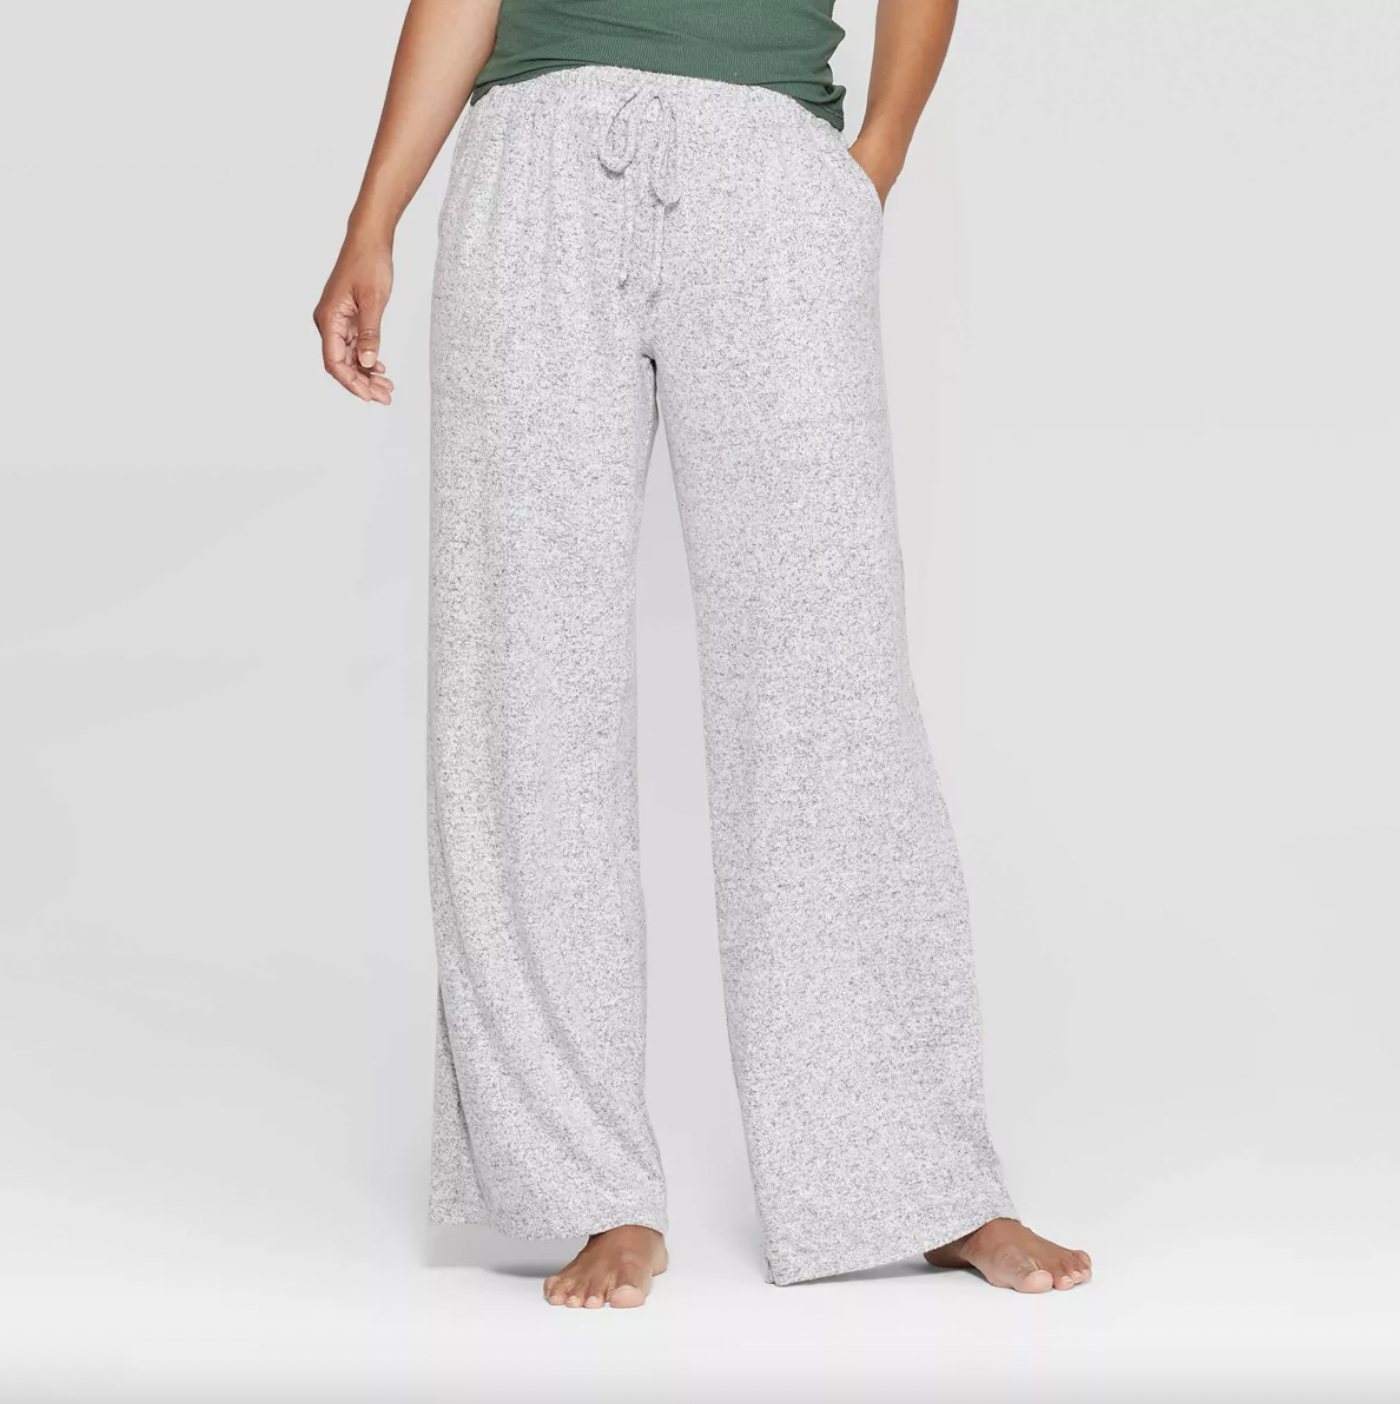 Person wearing gray speckled lounge pants with drawstring and a green top